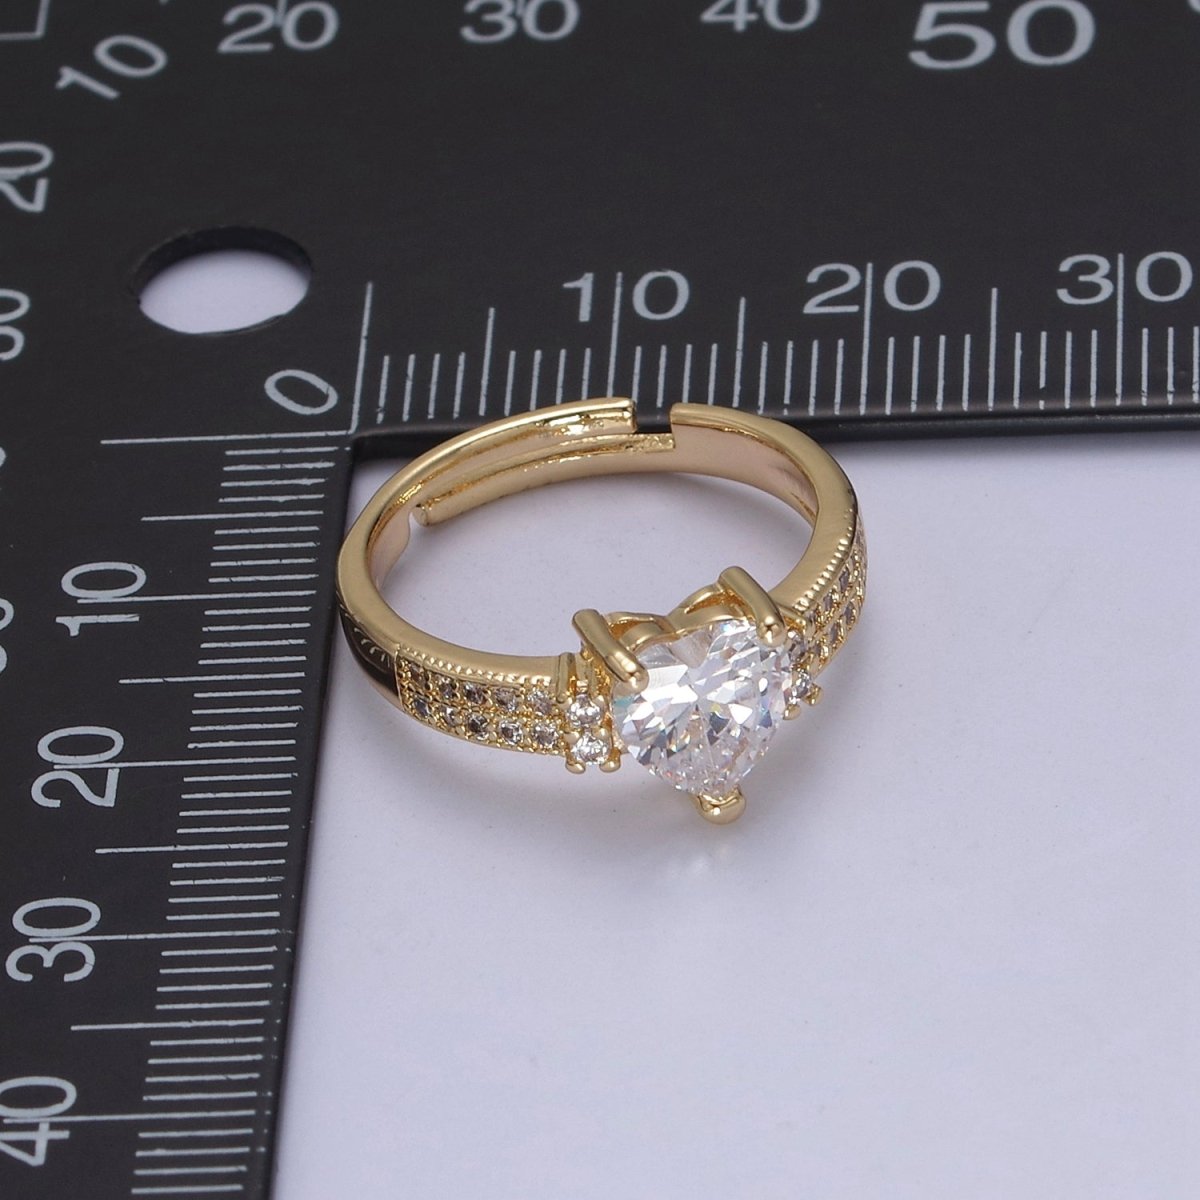 Unique Heart Shaped Cz Adjustable Ring, Perfect Birthday Christmas Gift For Her Anniversary Wedding Ring For Her U-306 - DLUXCA